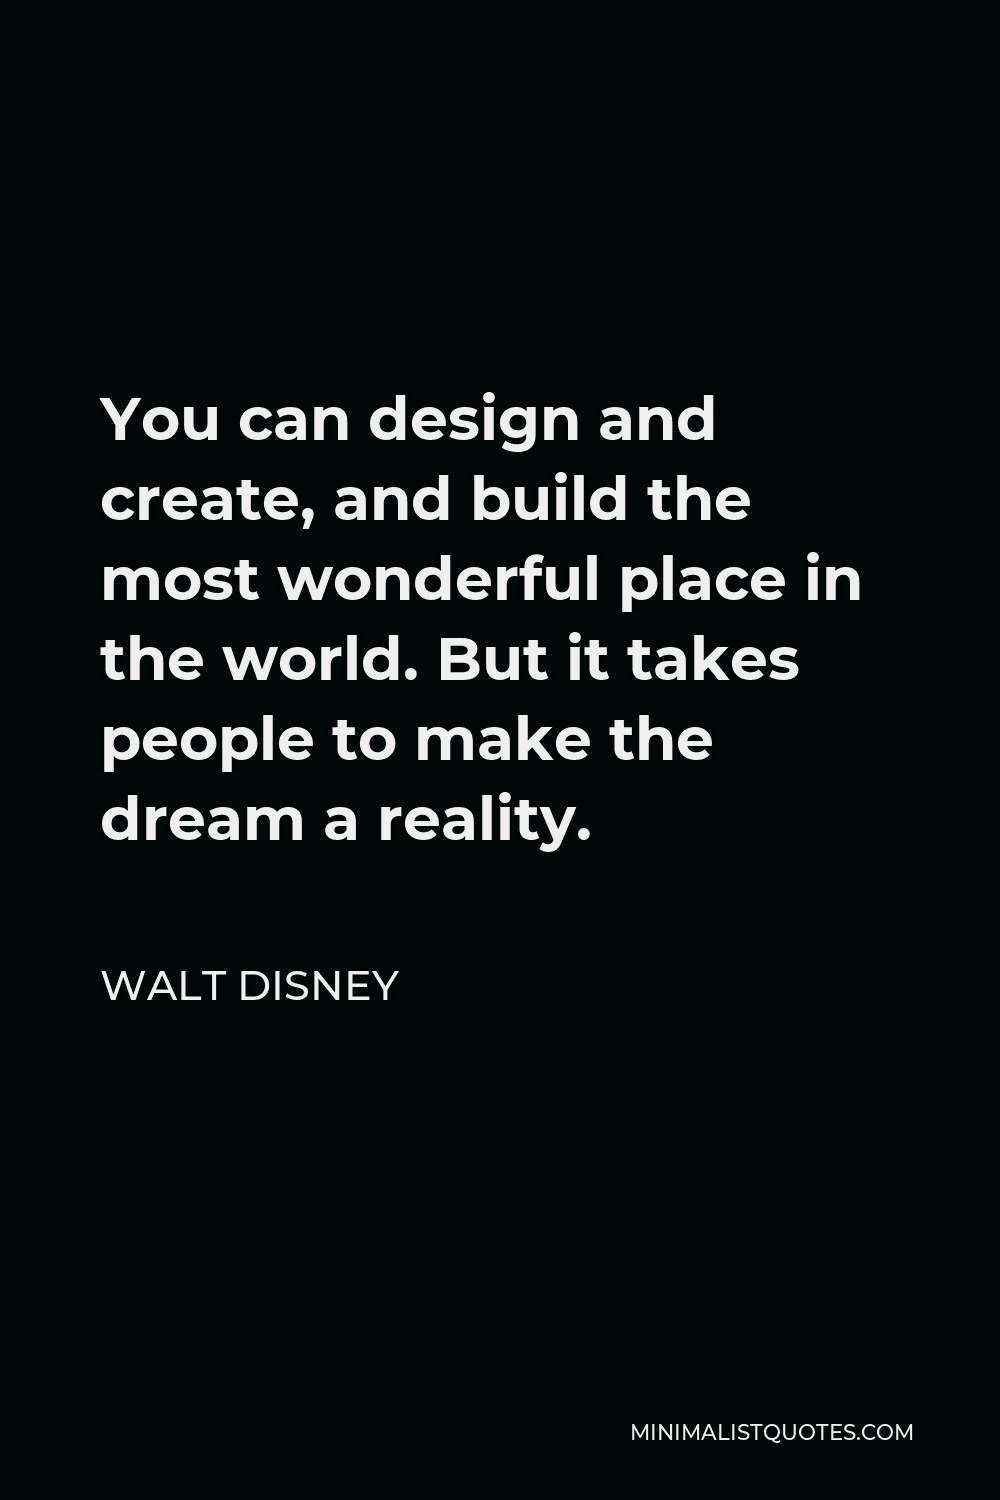 Walt Disney Quote - You can design and create, and build the most wonderful place in the world. But it takes people to make the dream a reality.